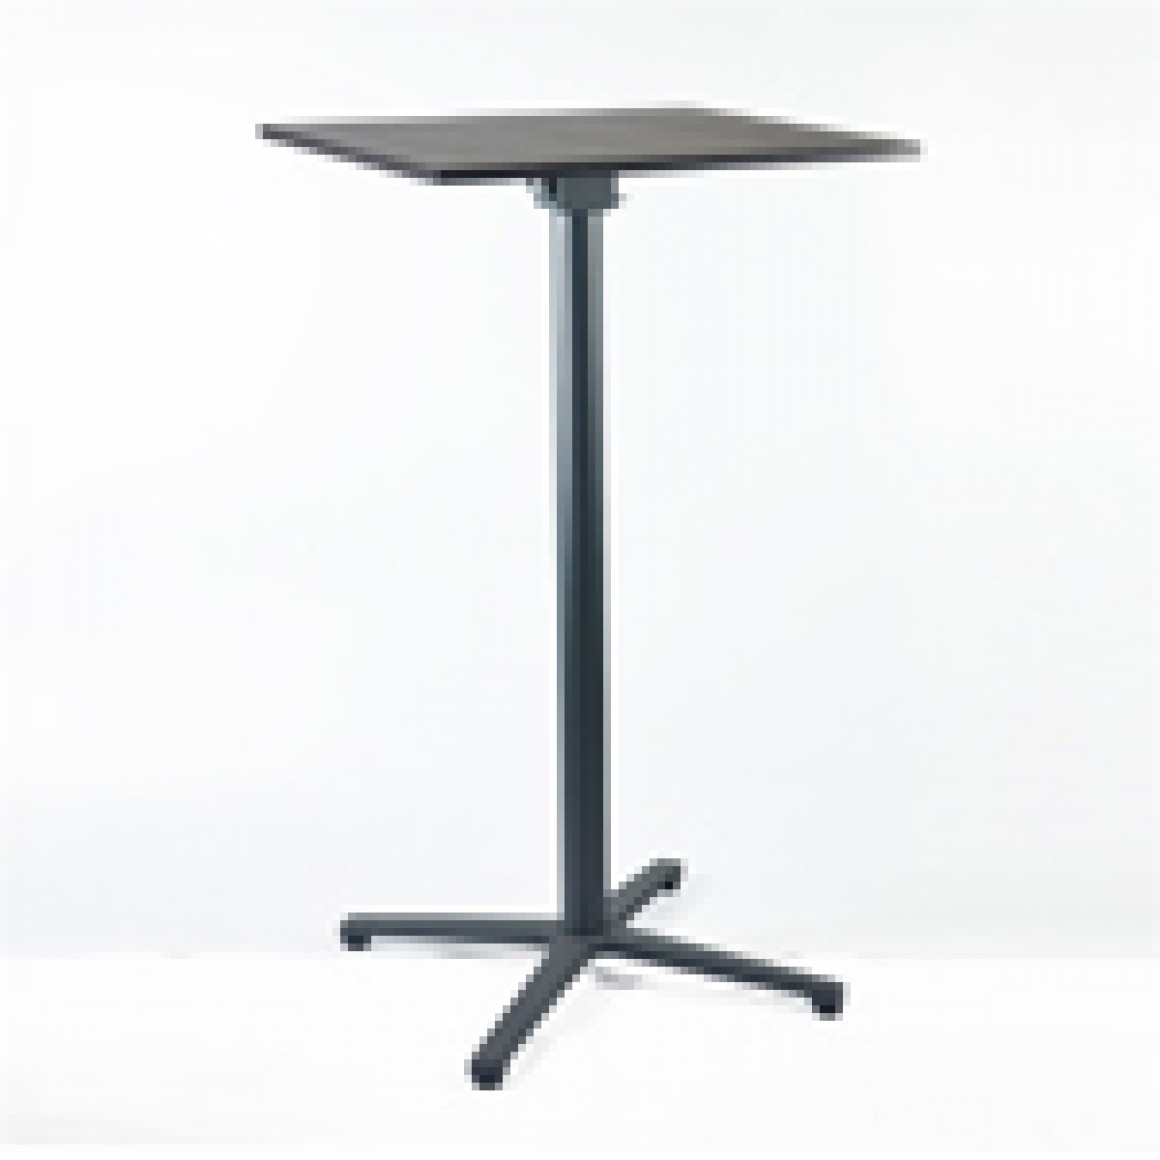 Table: 25mm laminate table top with black PVC edged, stainless steel folding table leg